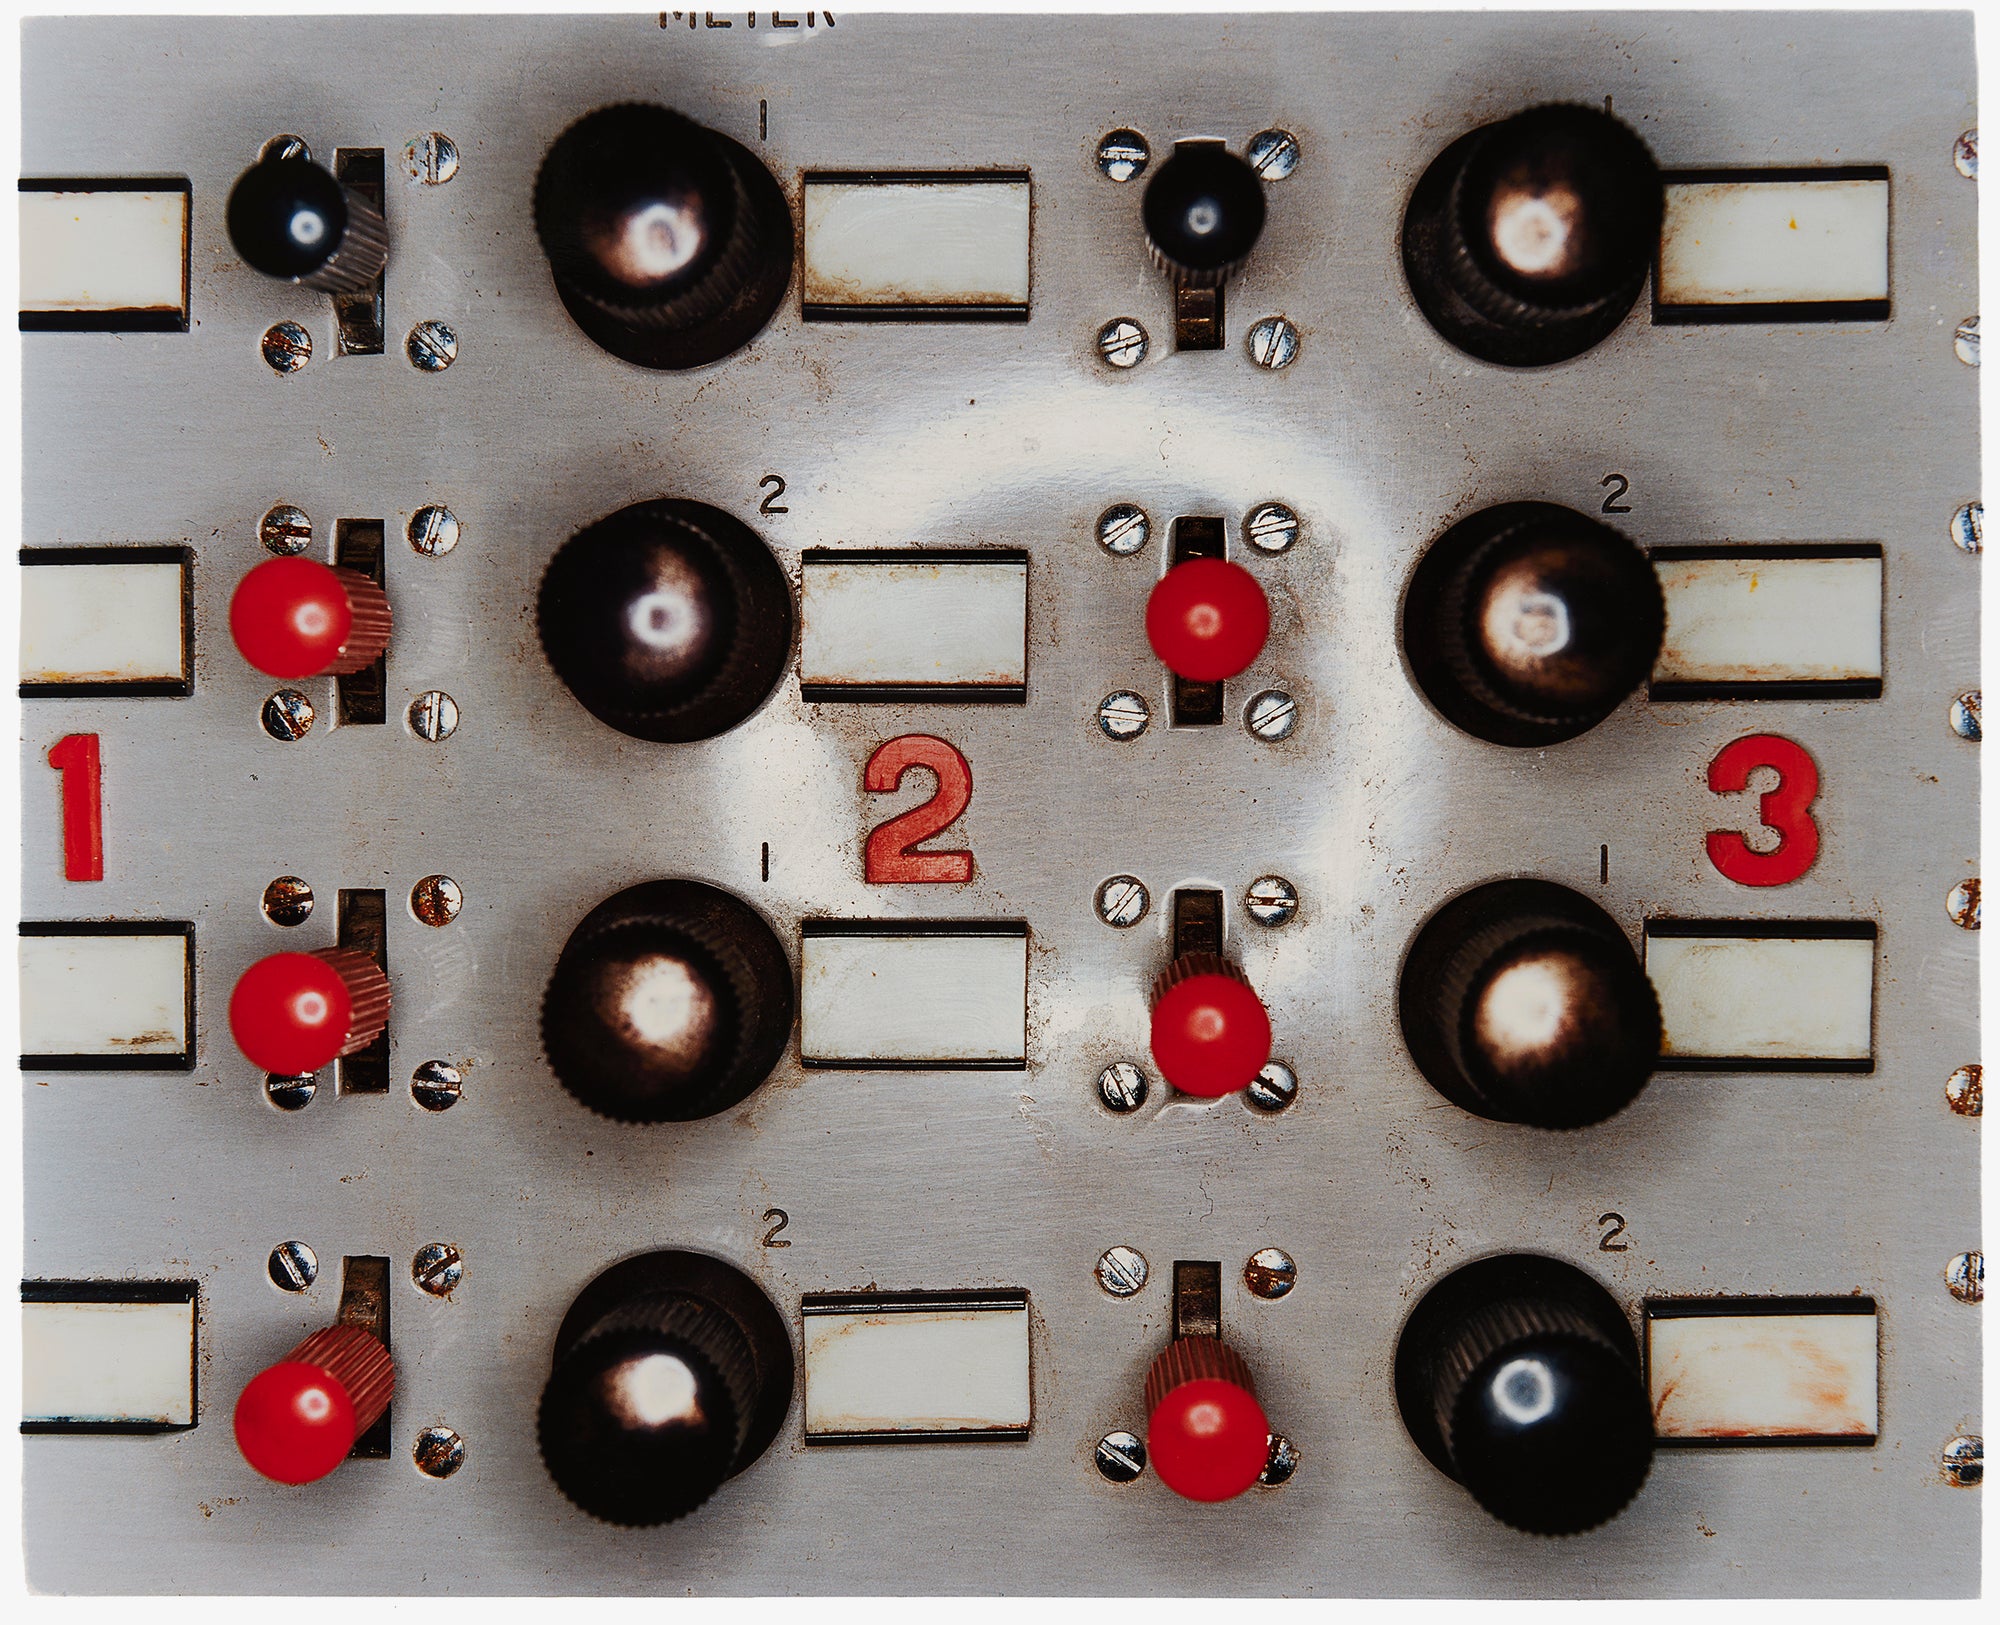 Photograph by Richard Heeps. A grey panel with four vertical lines of knobs alternating from left to right with three red knobs and one black knob, next to four black bigger knobs, this repeats. Then along the horizontal middle are numbers in red 1, 2 and 3.